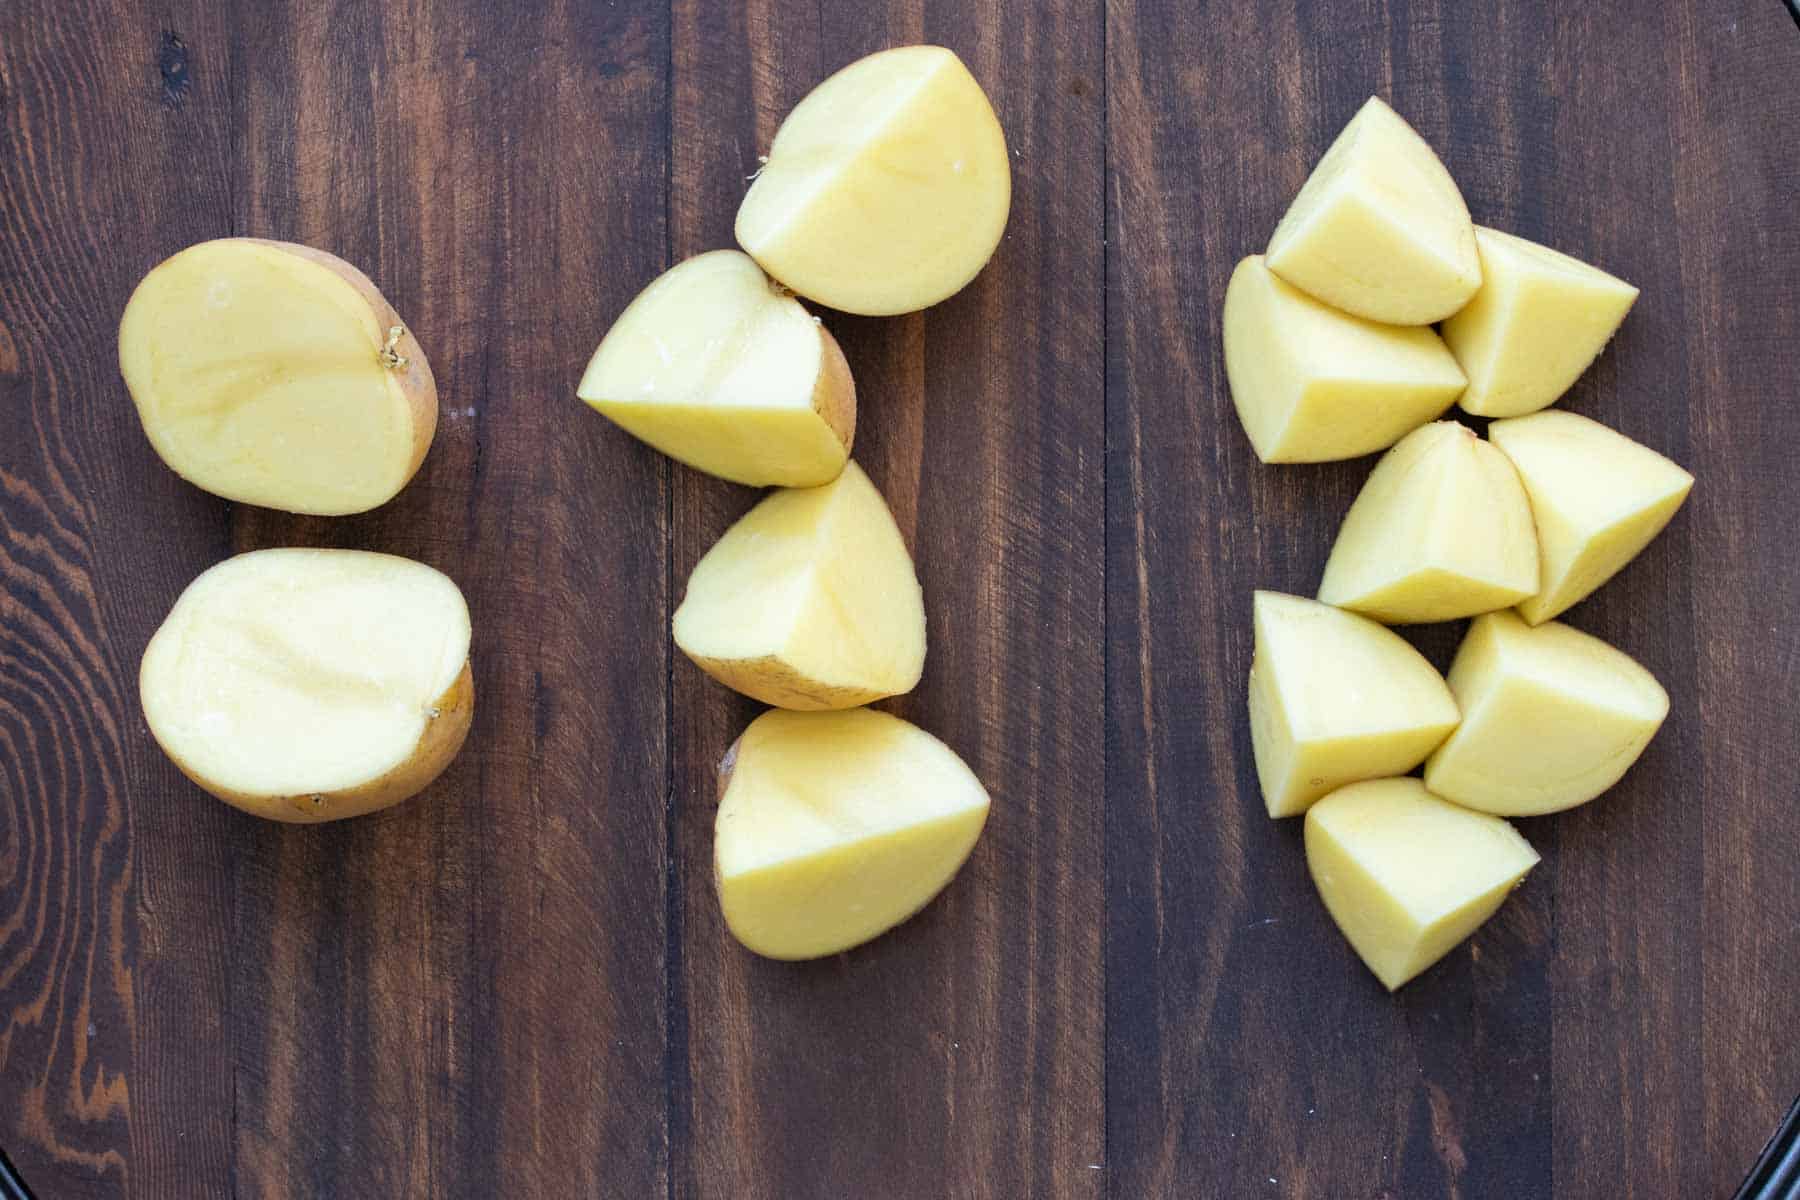 Piles of cut potatoes on a wooden table top